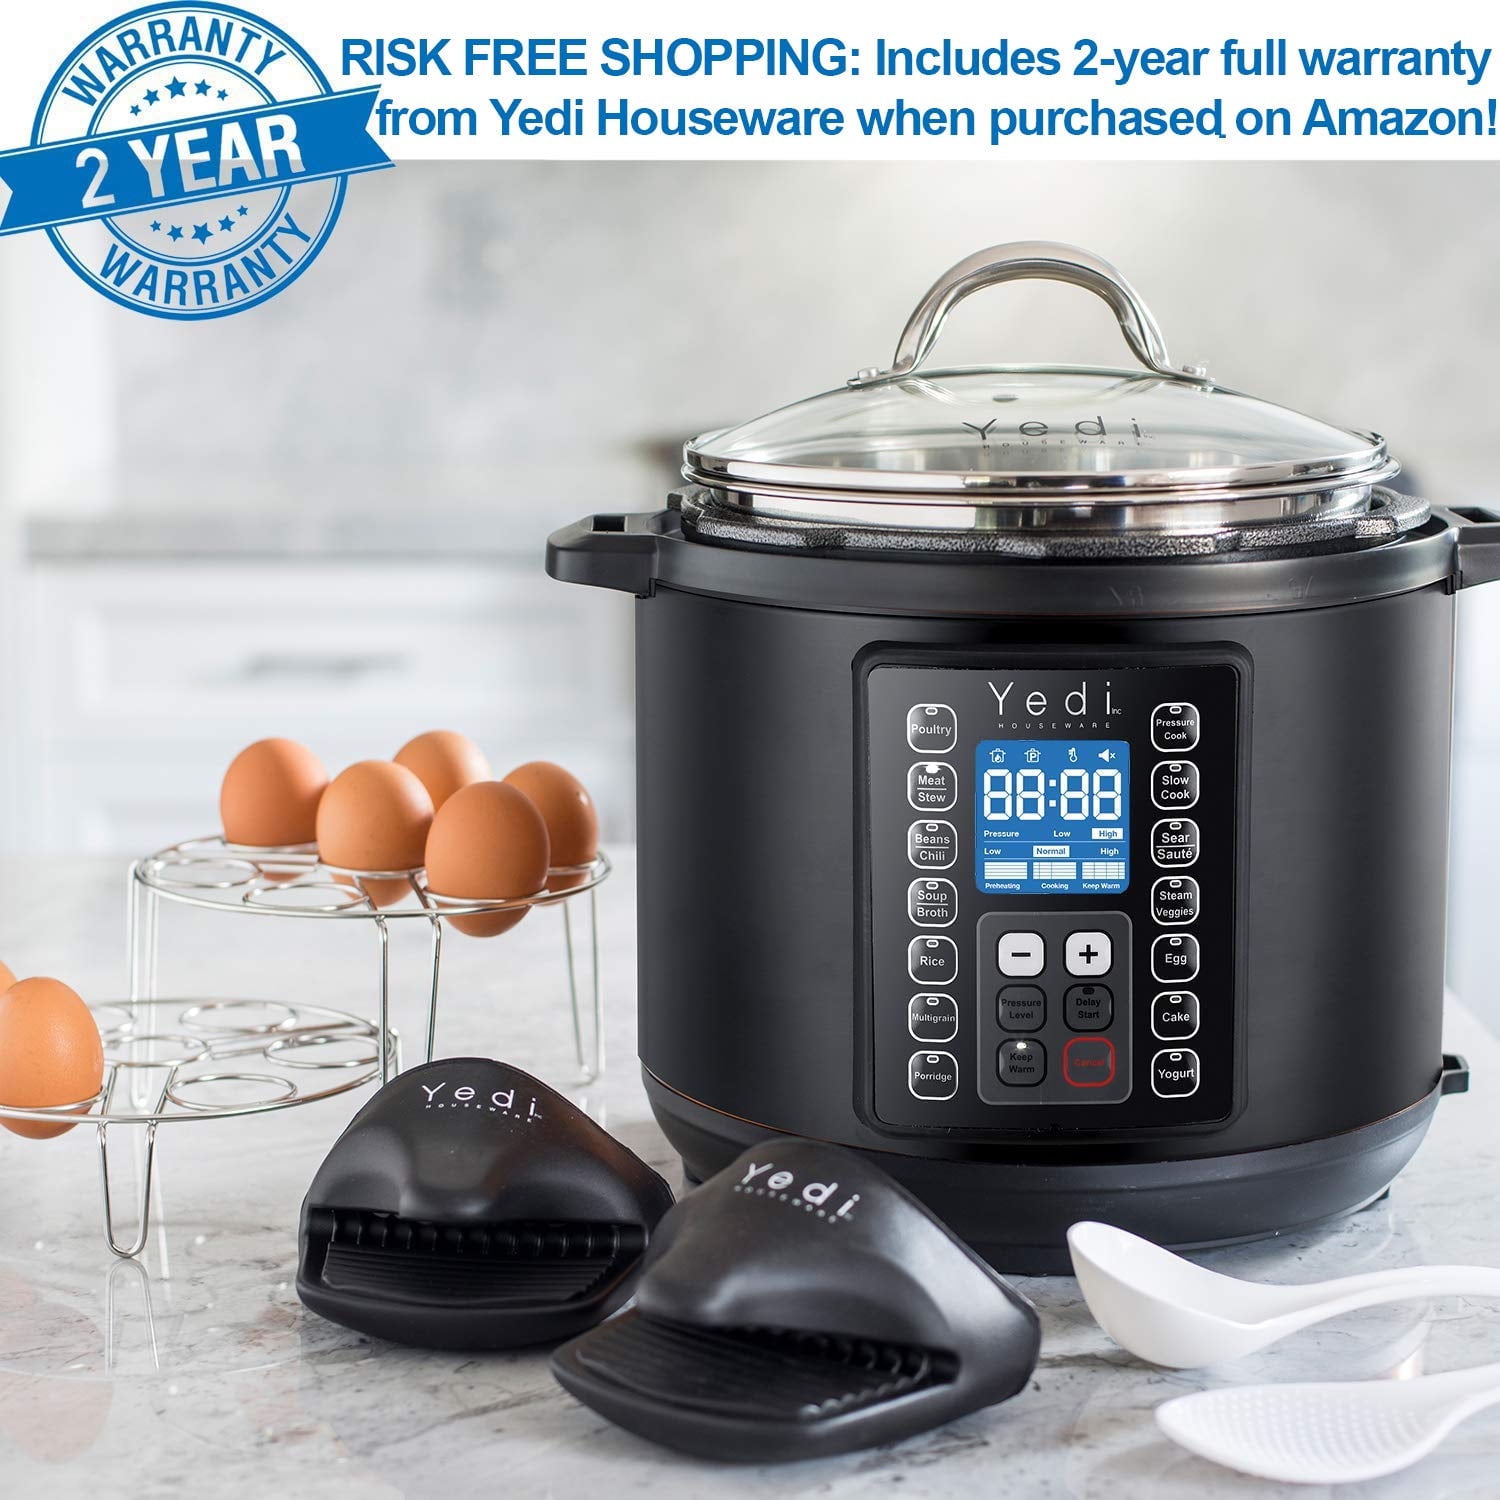 Yedi Houseware RNAB08FBM1388 yedi tango, 2-in-1 air fryer and pressure  cooker, 6 quart, with deluxe accessory kit